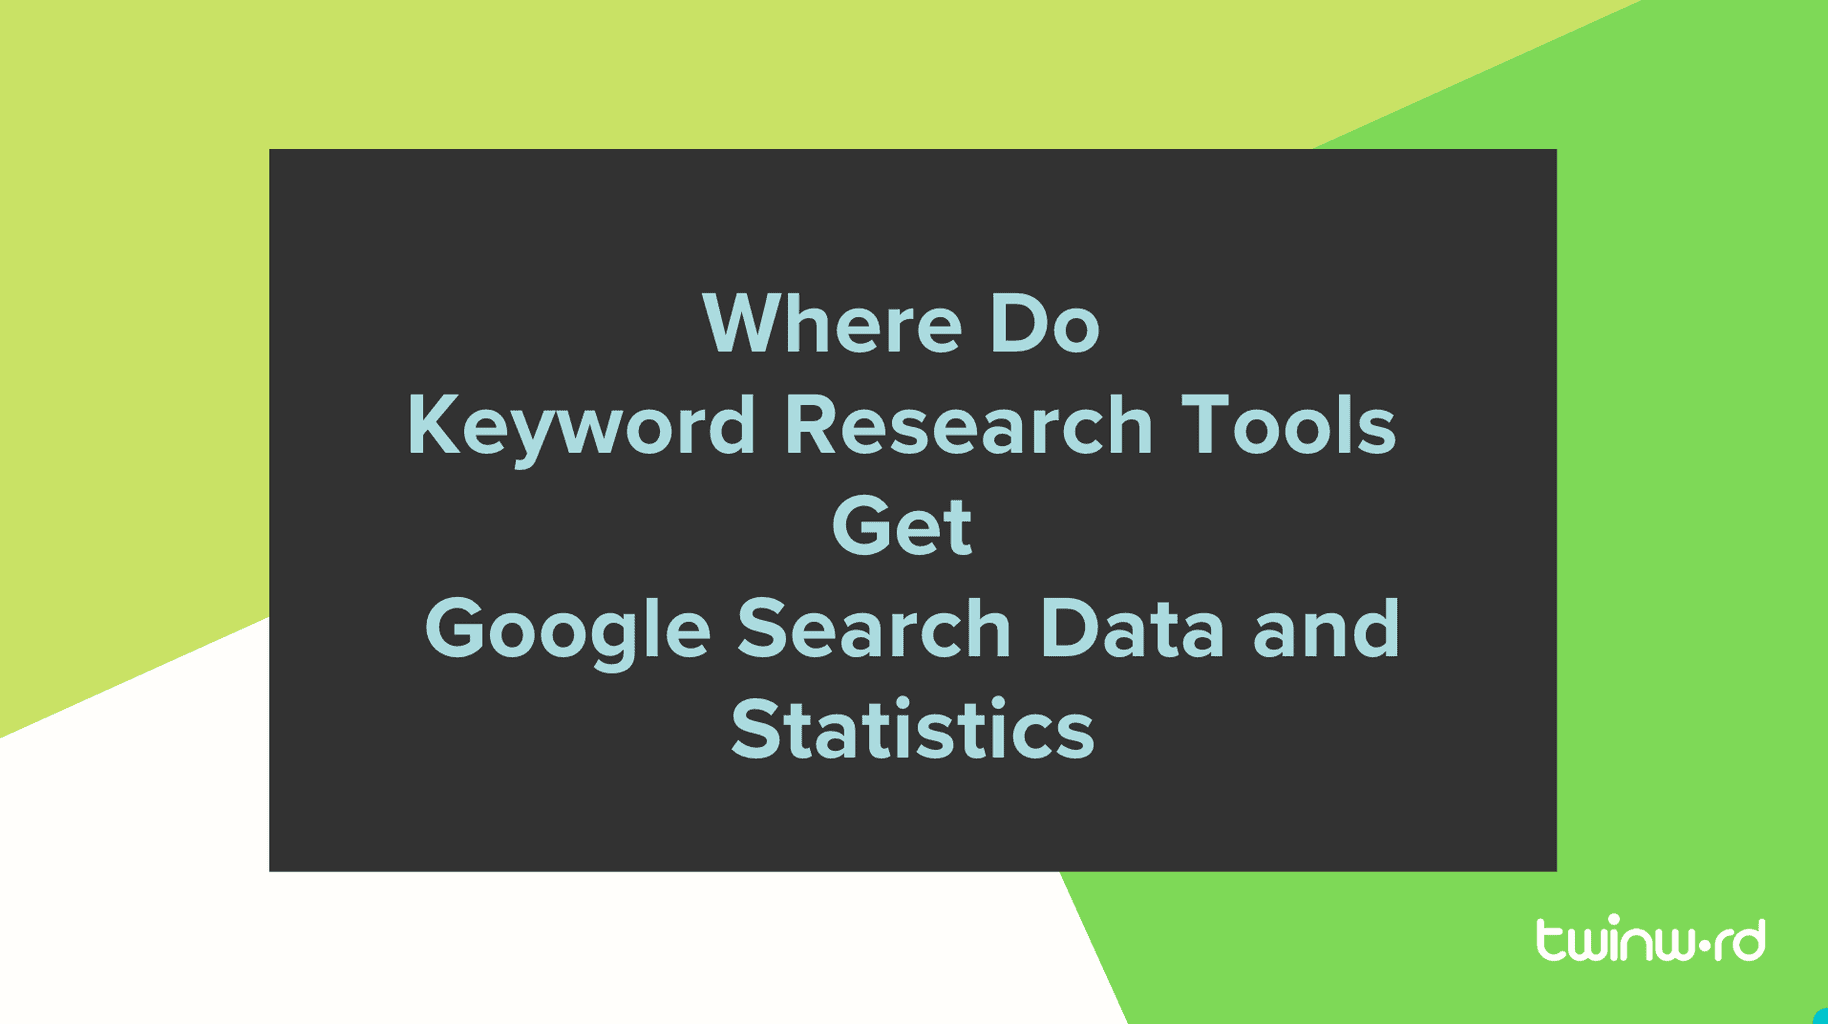 Where Do Keyword Research Tools Get Google Search Data and Statistics